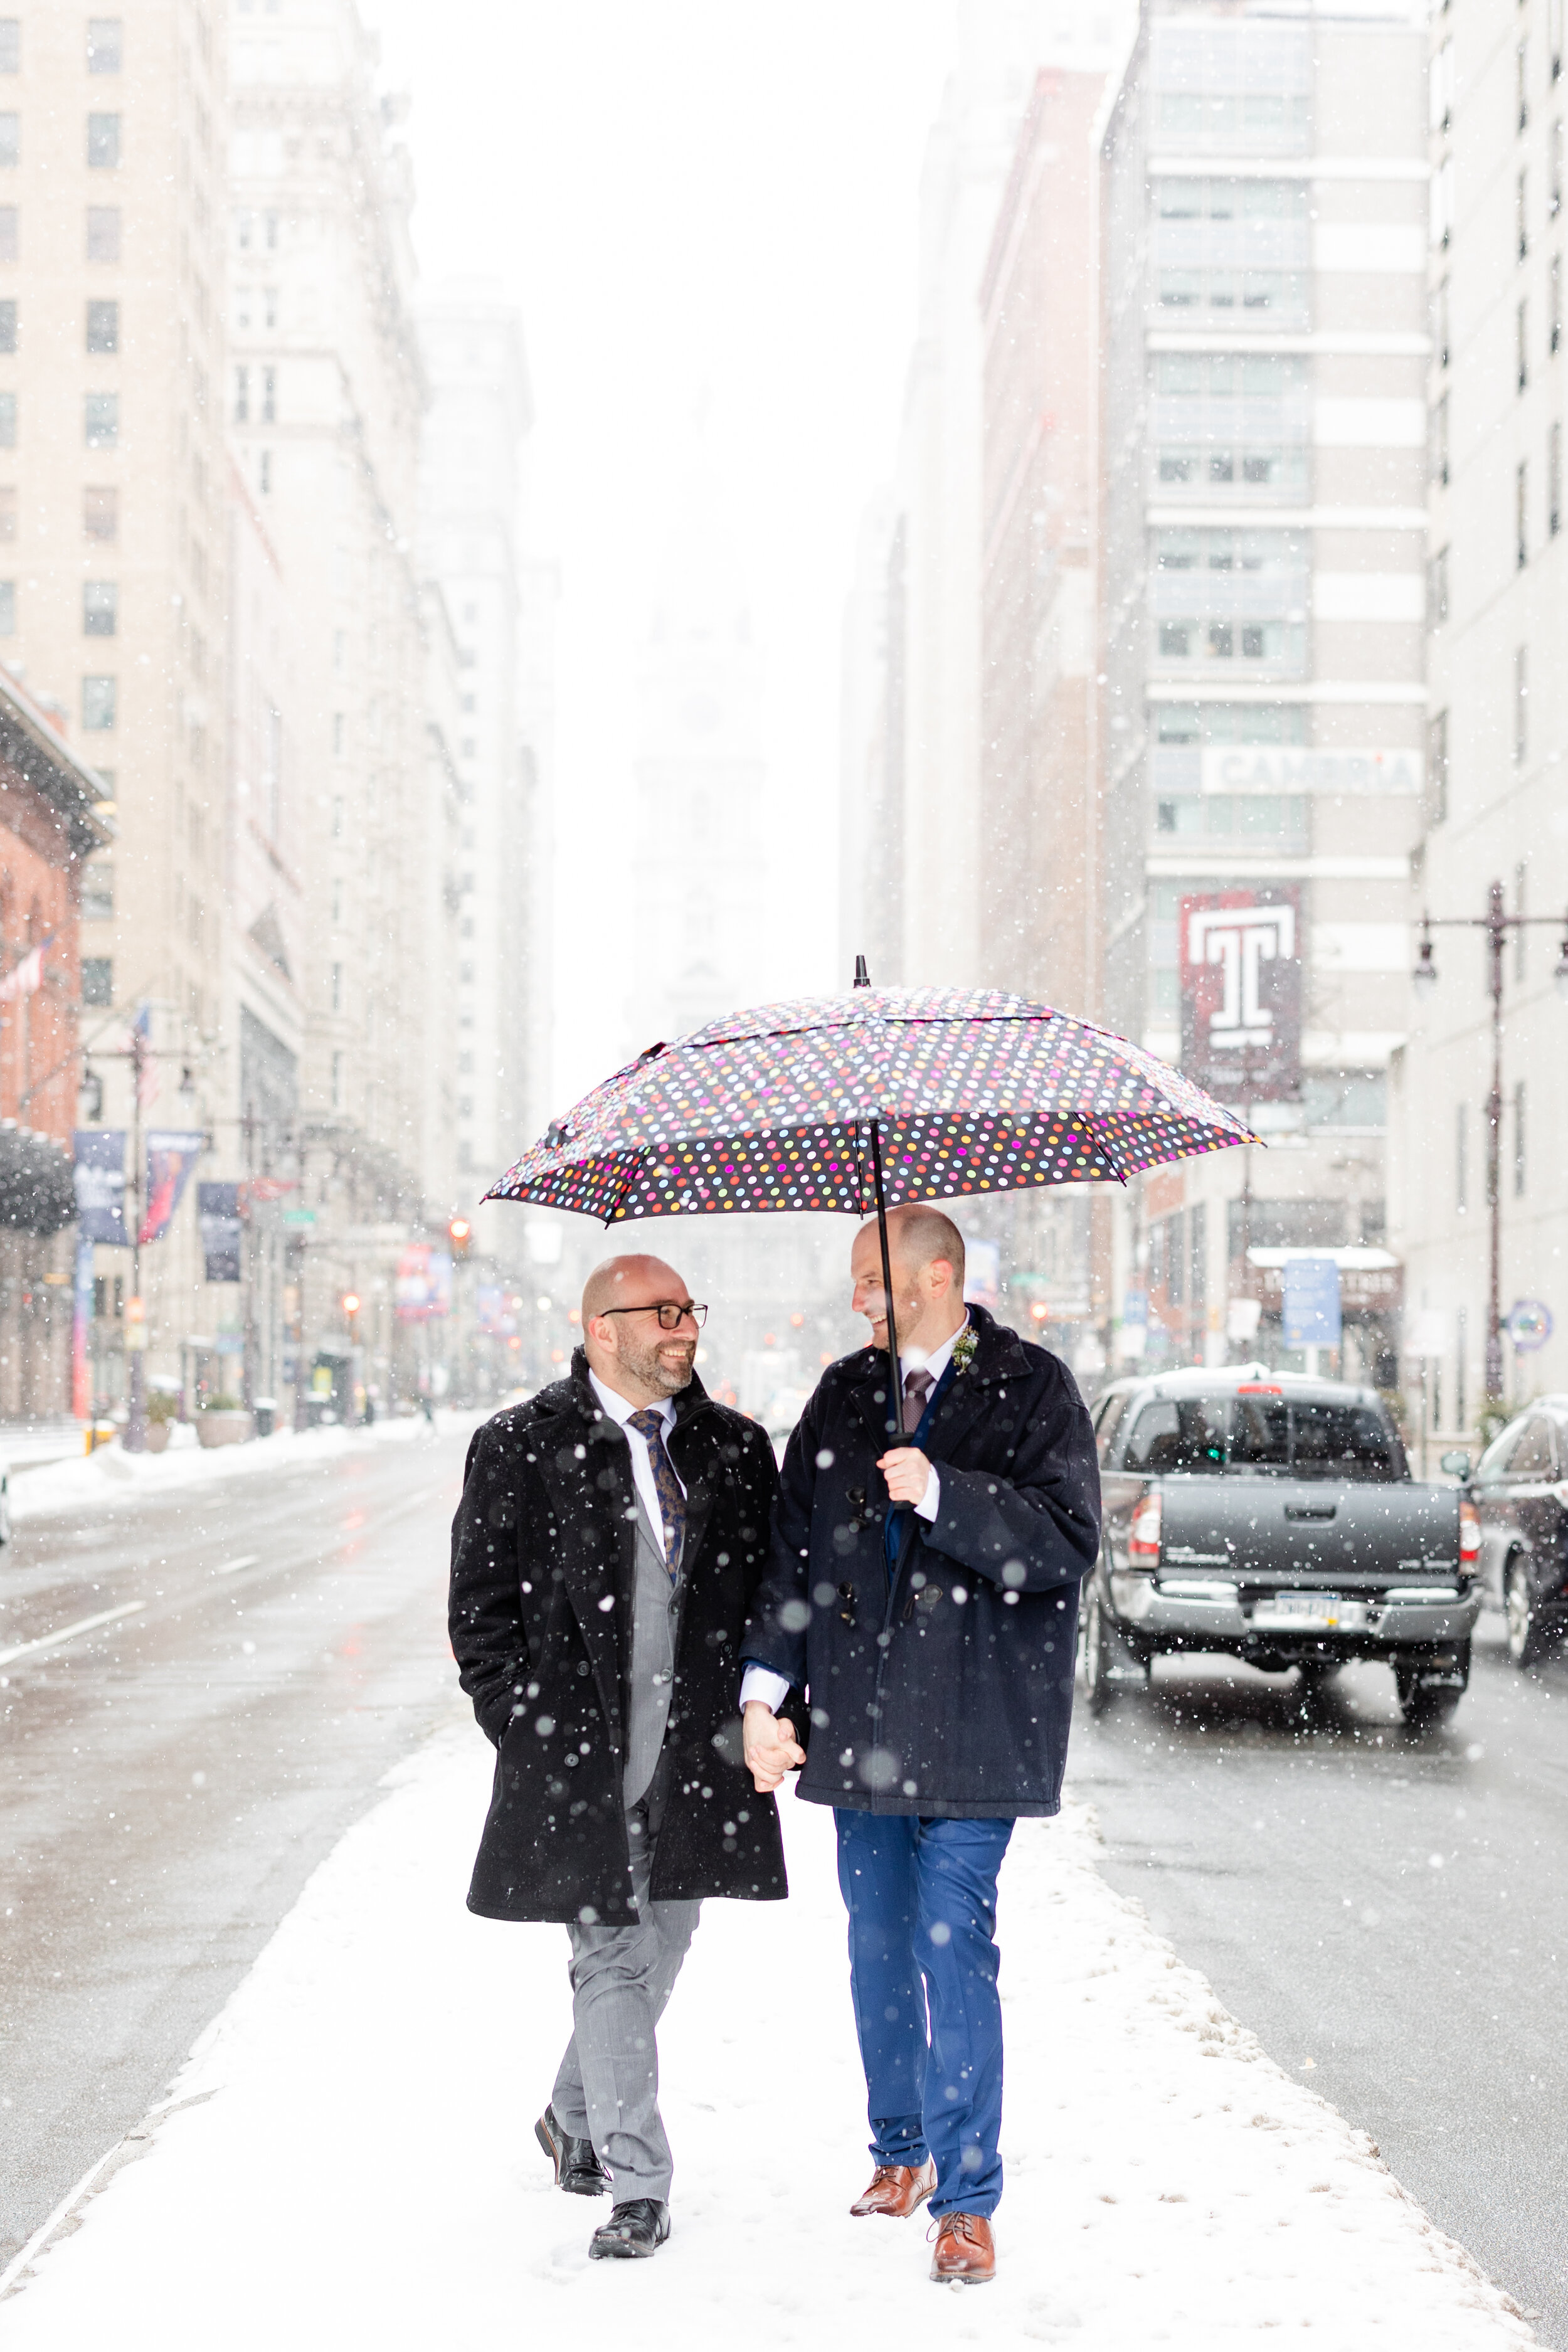 Curtis-and-Bill-Snowy-Vaux-Philly-Elopement-27.jpg